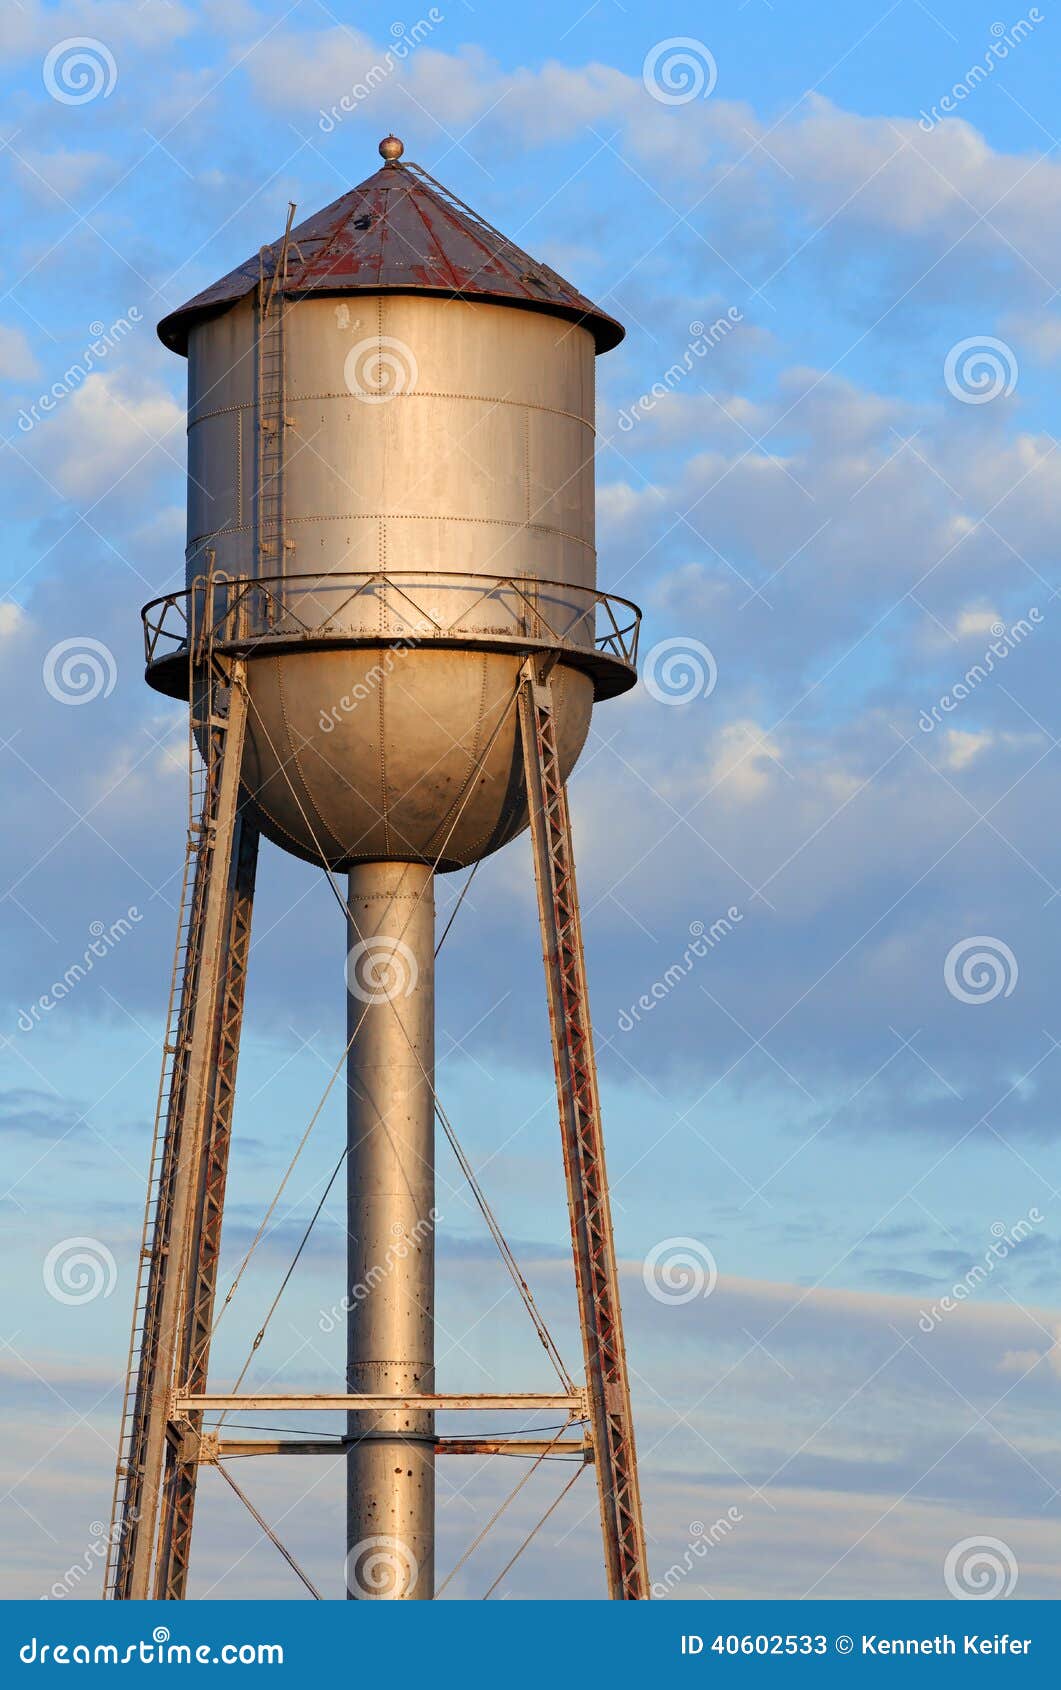 metal-water-tower-morning-sky-old-tank-light-sun-stands-tall-against-cloudy-blue-americas-midwest-40602533.jpg